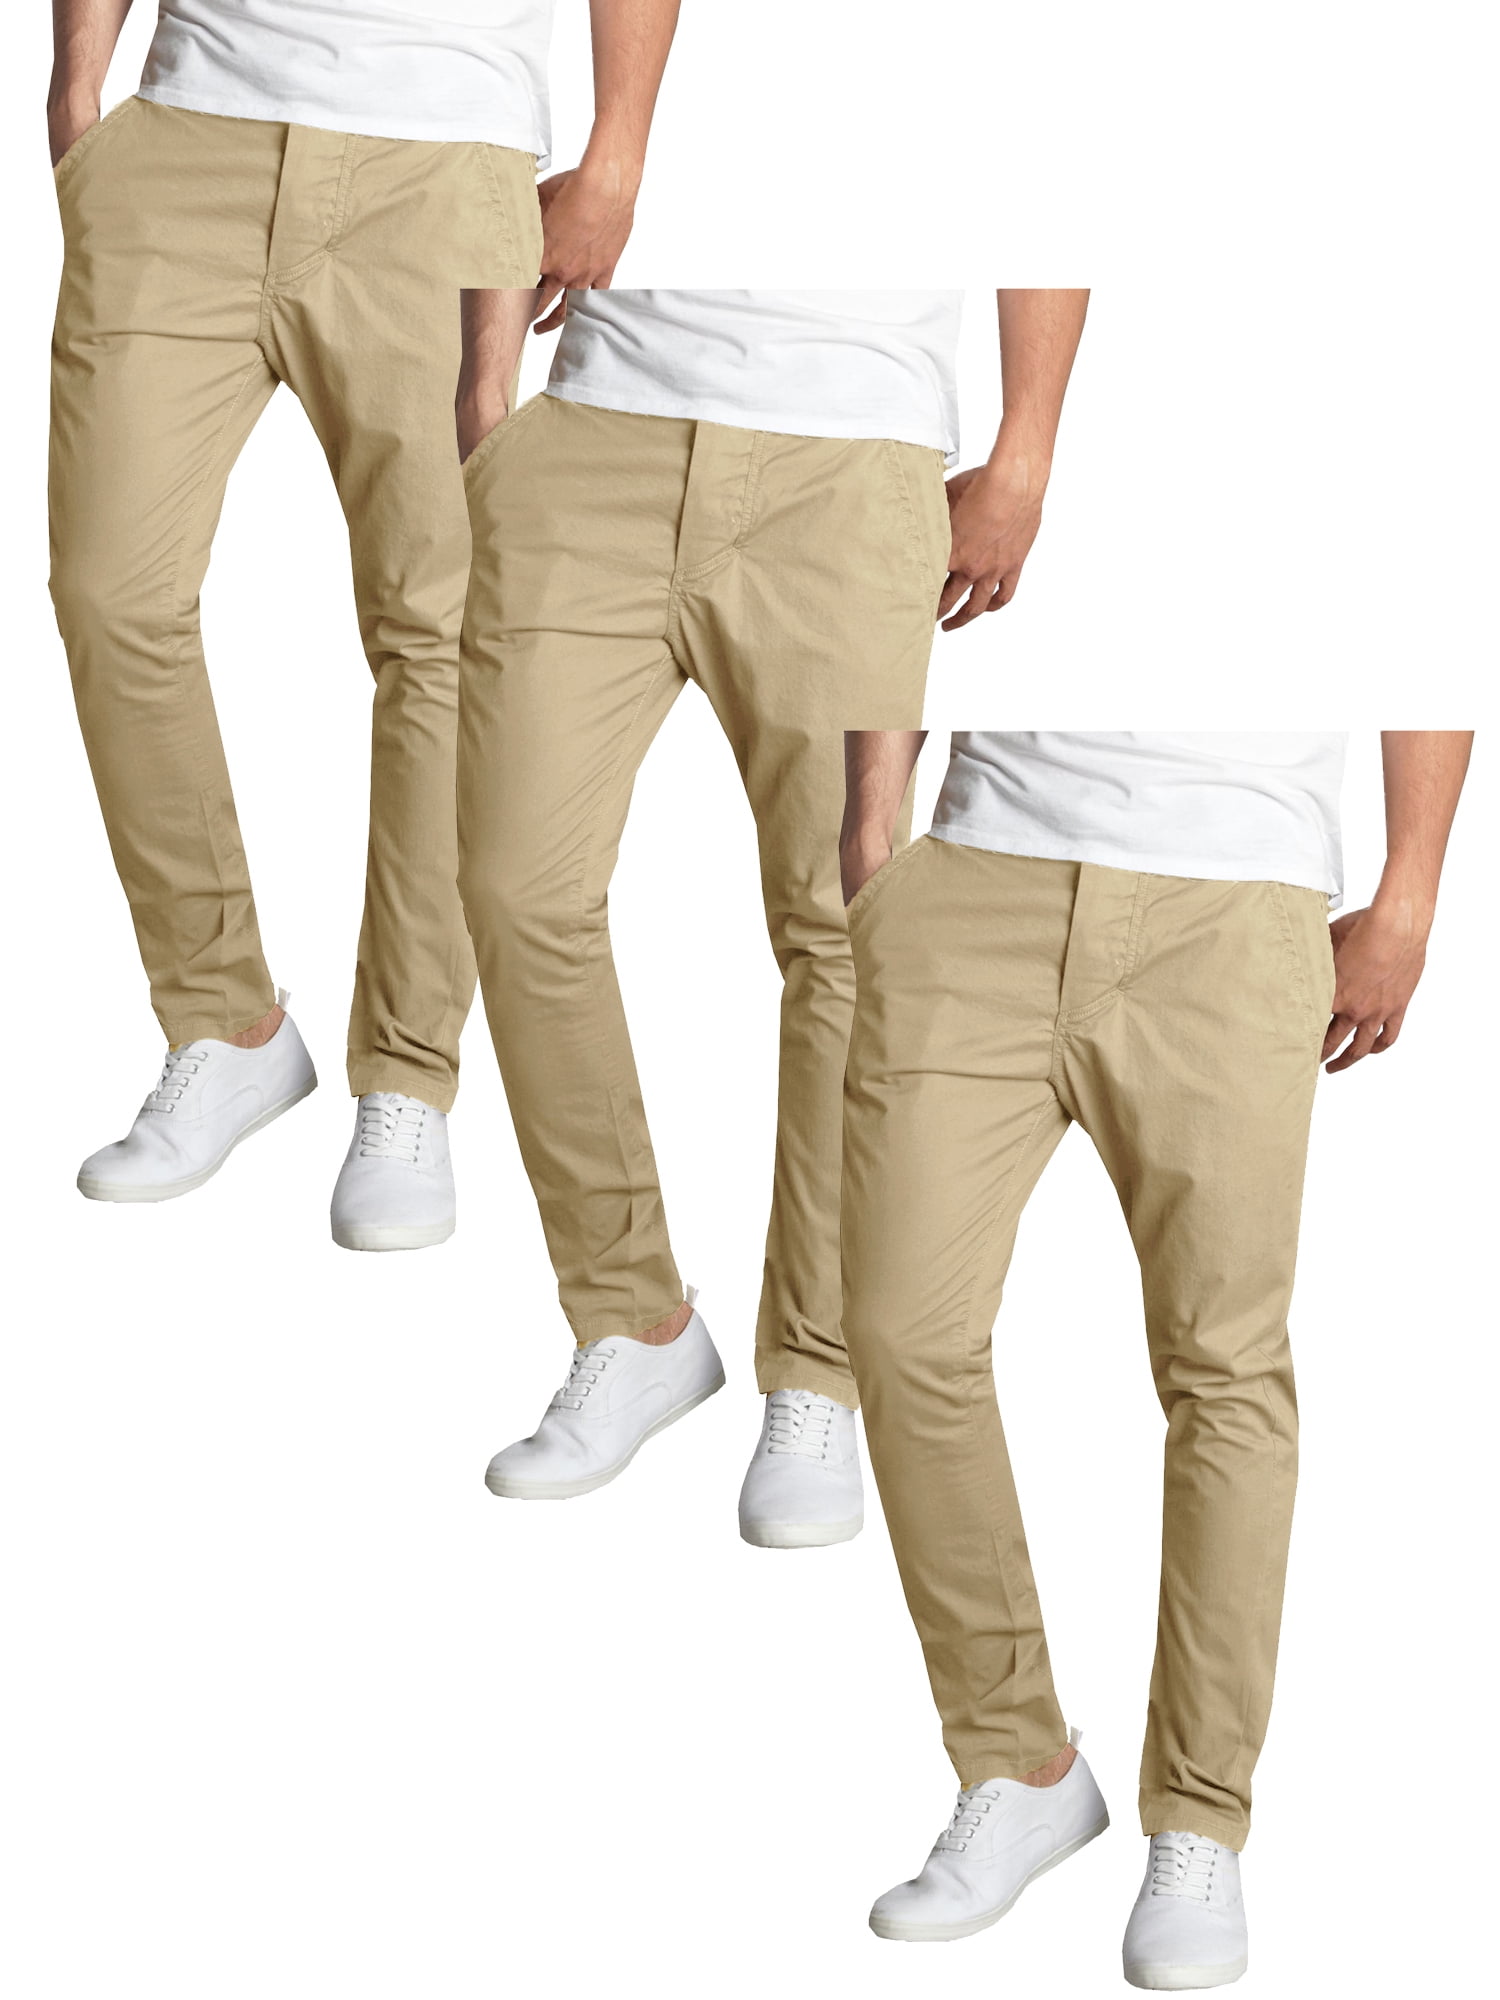 Mens Stallion Chino Trousers Slim Fit Stretch Jeans Casual Cotton Designer New